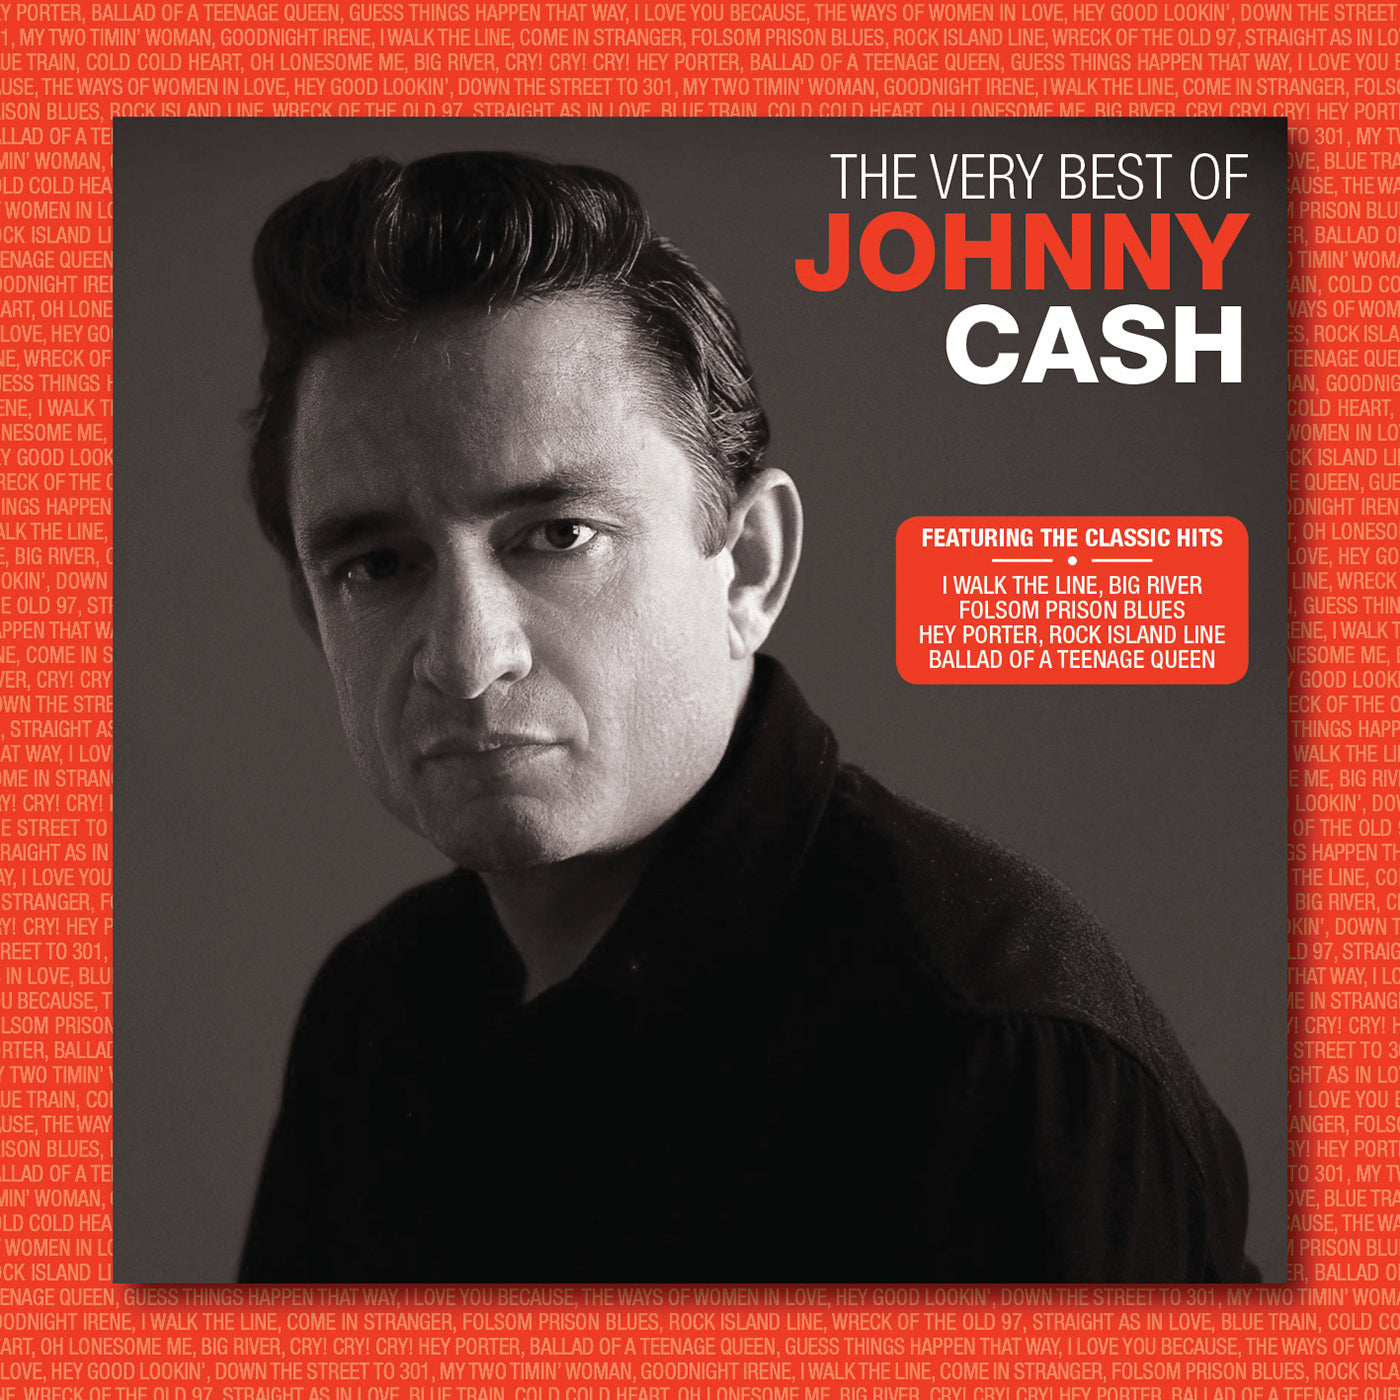 JOHNNY CASH - THE VERY BEST OF